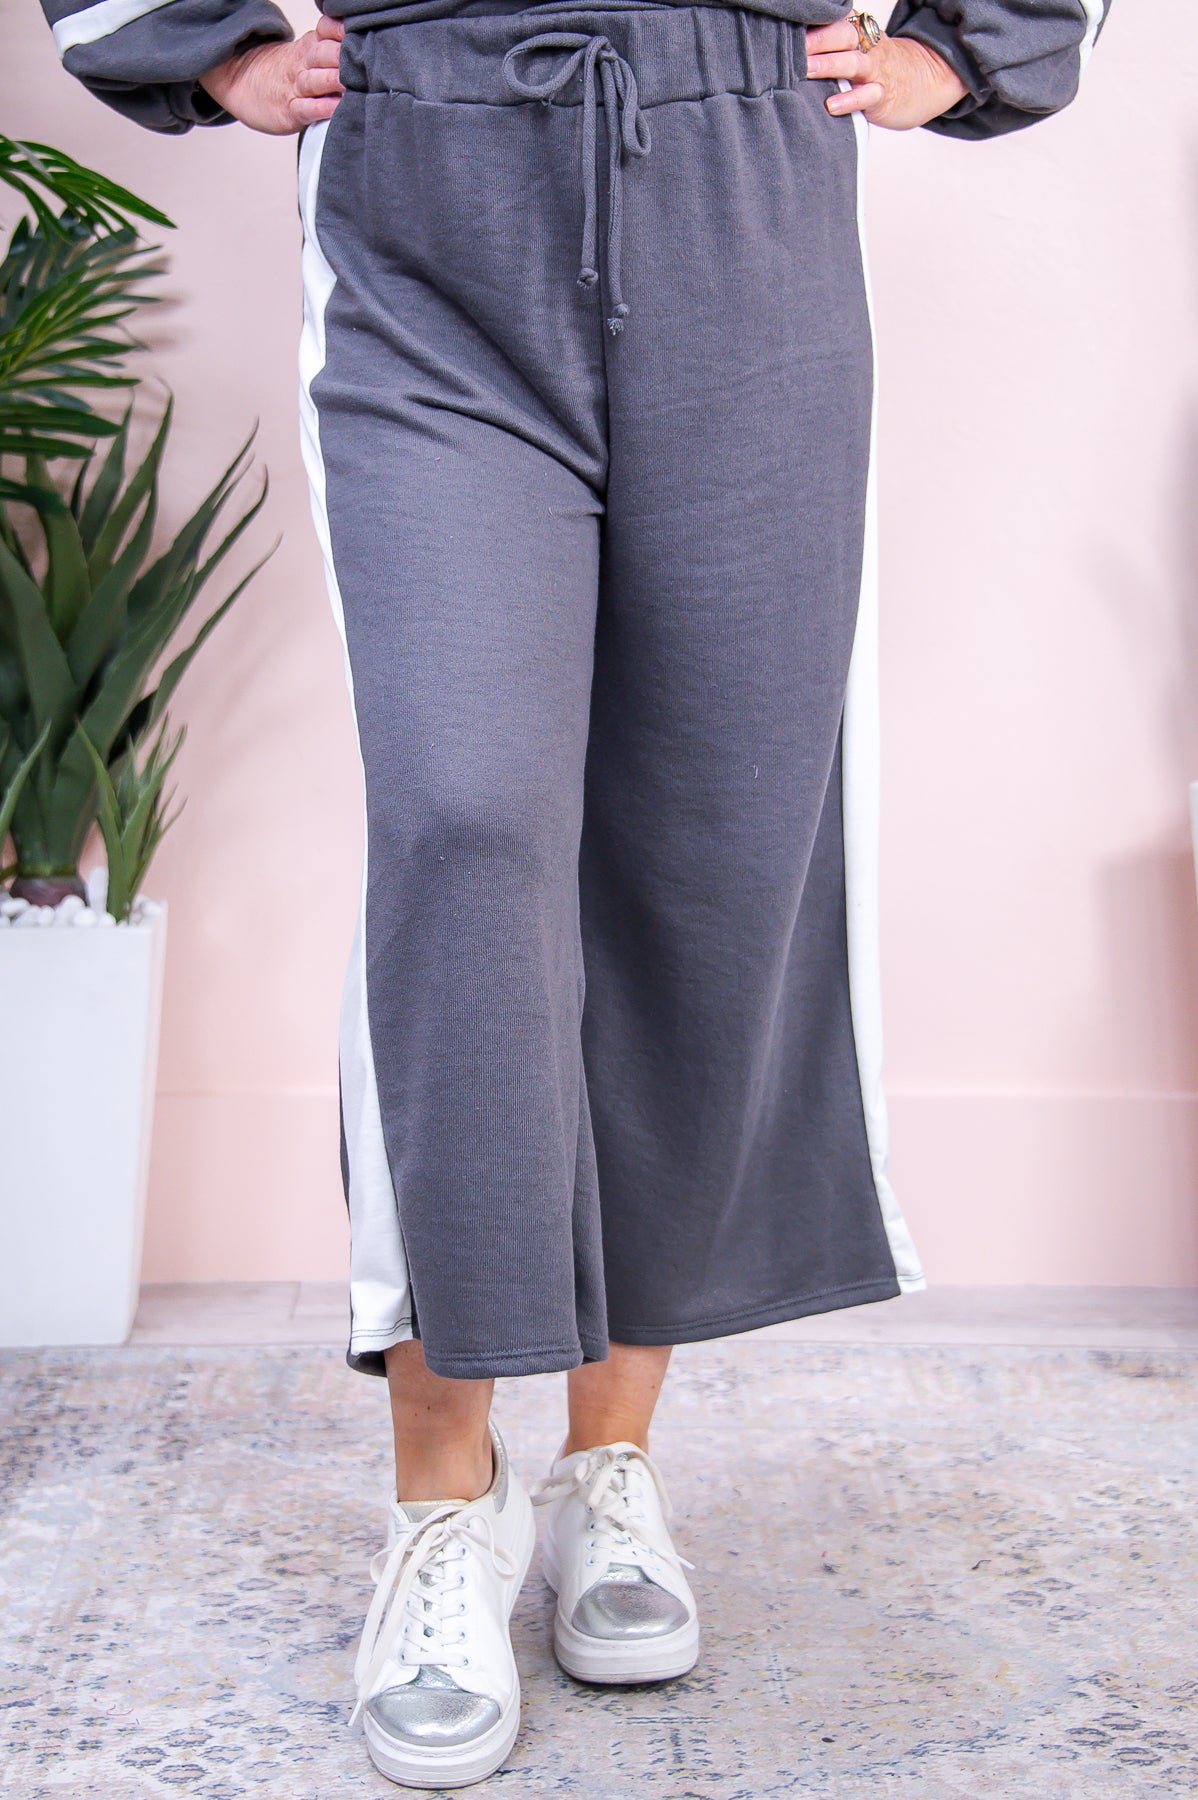 Casual Charm Charcoal/White Pants - PNT1552CH